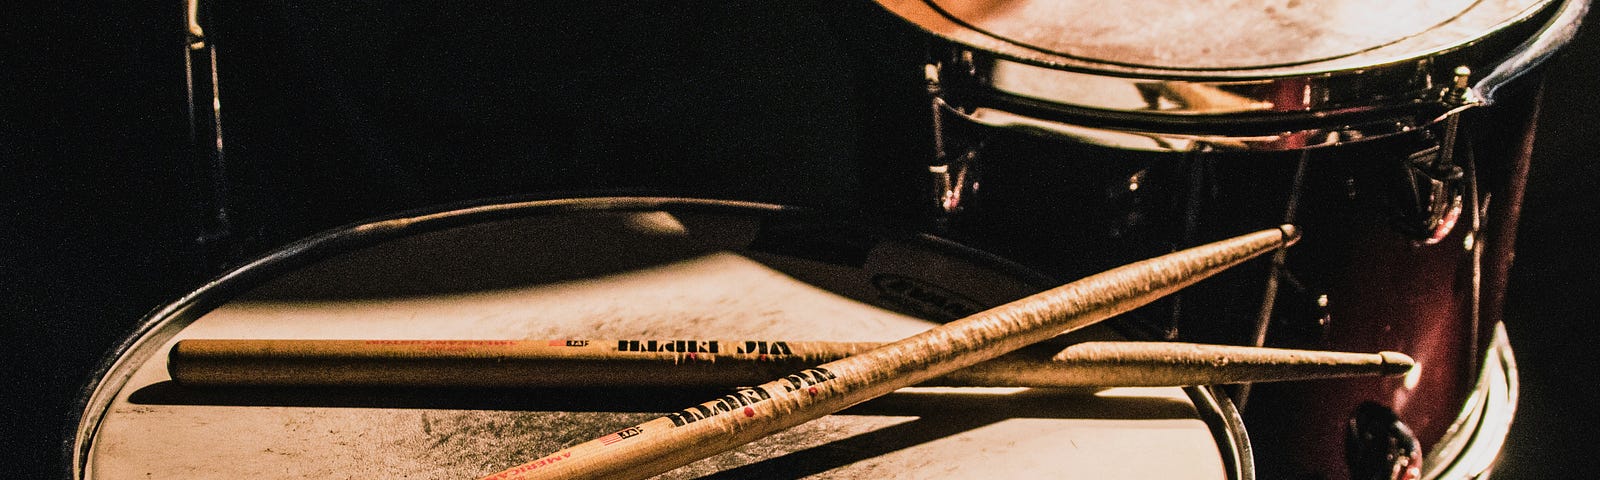 A well-worn drum set with a pair of drumsticks resting on it.